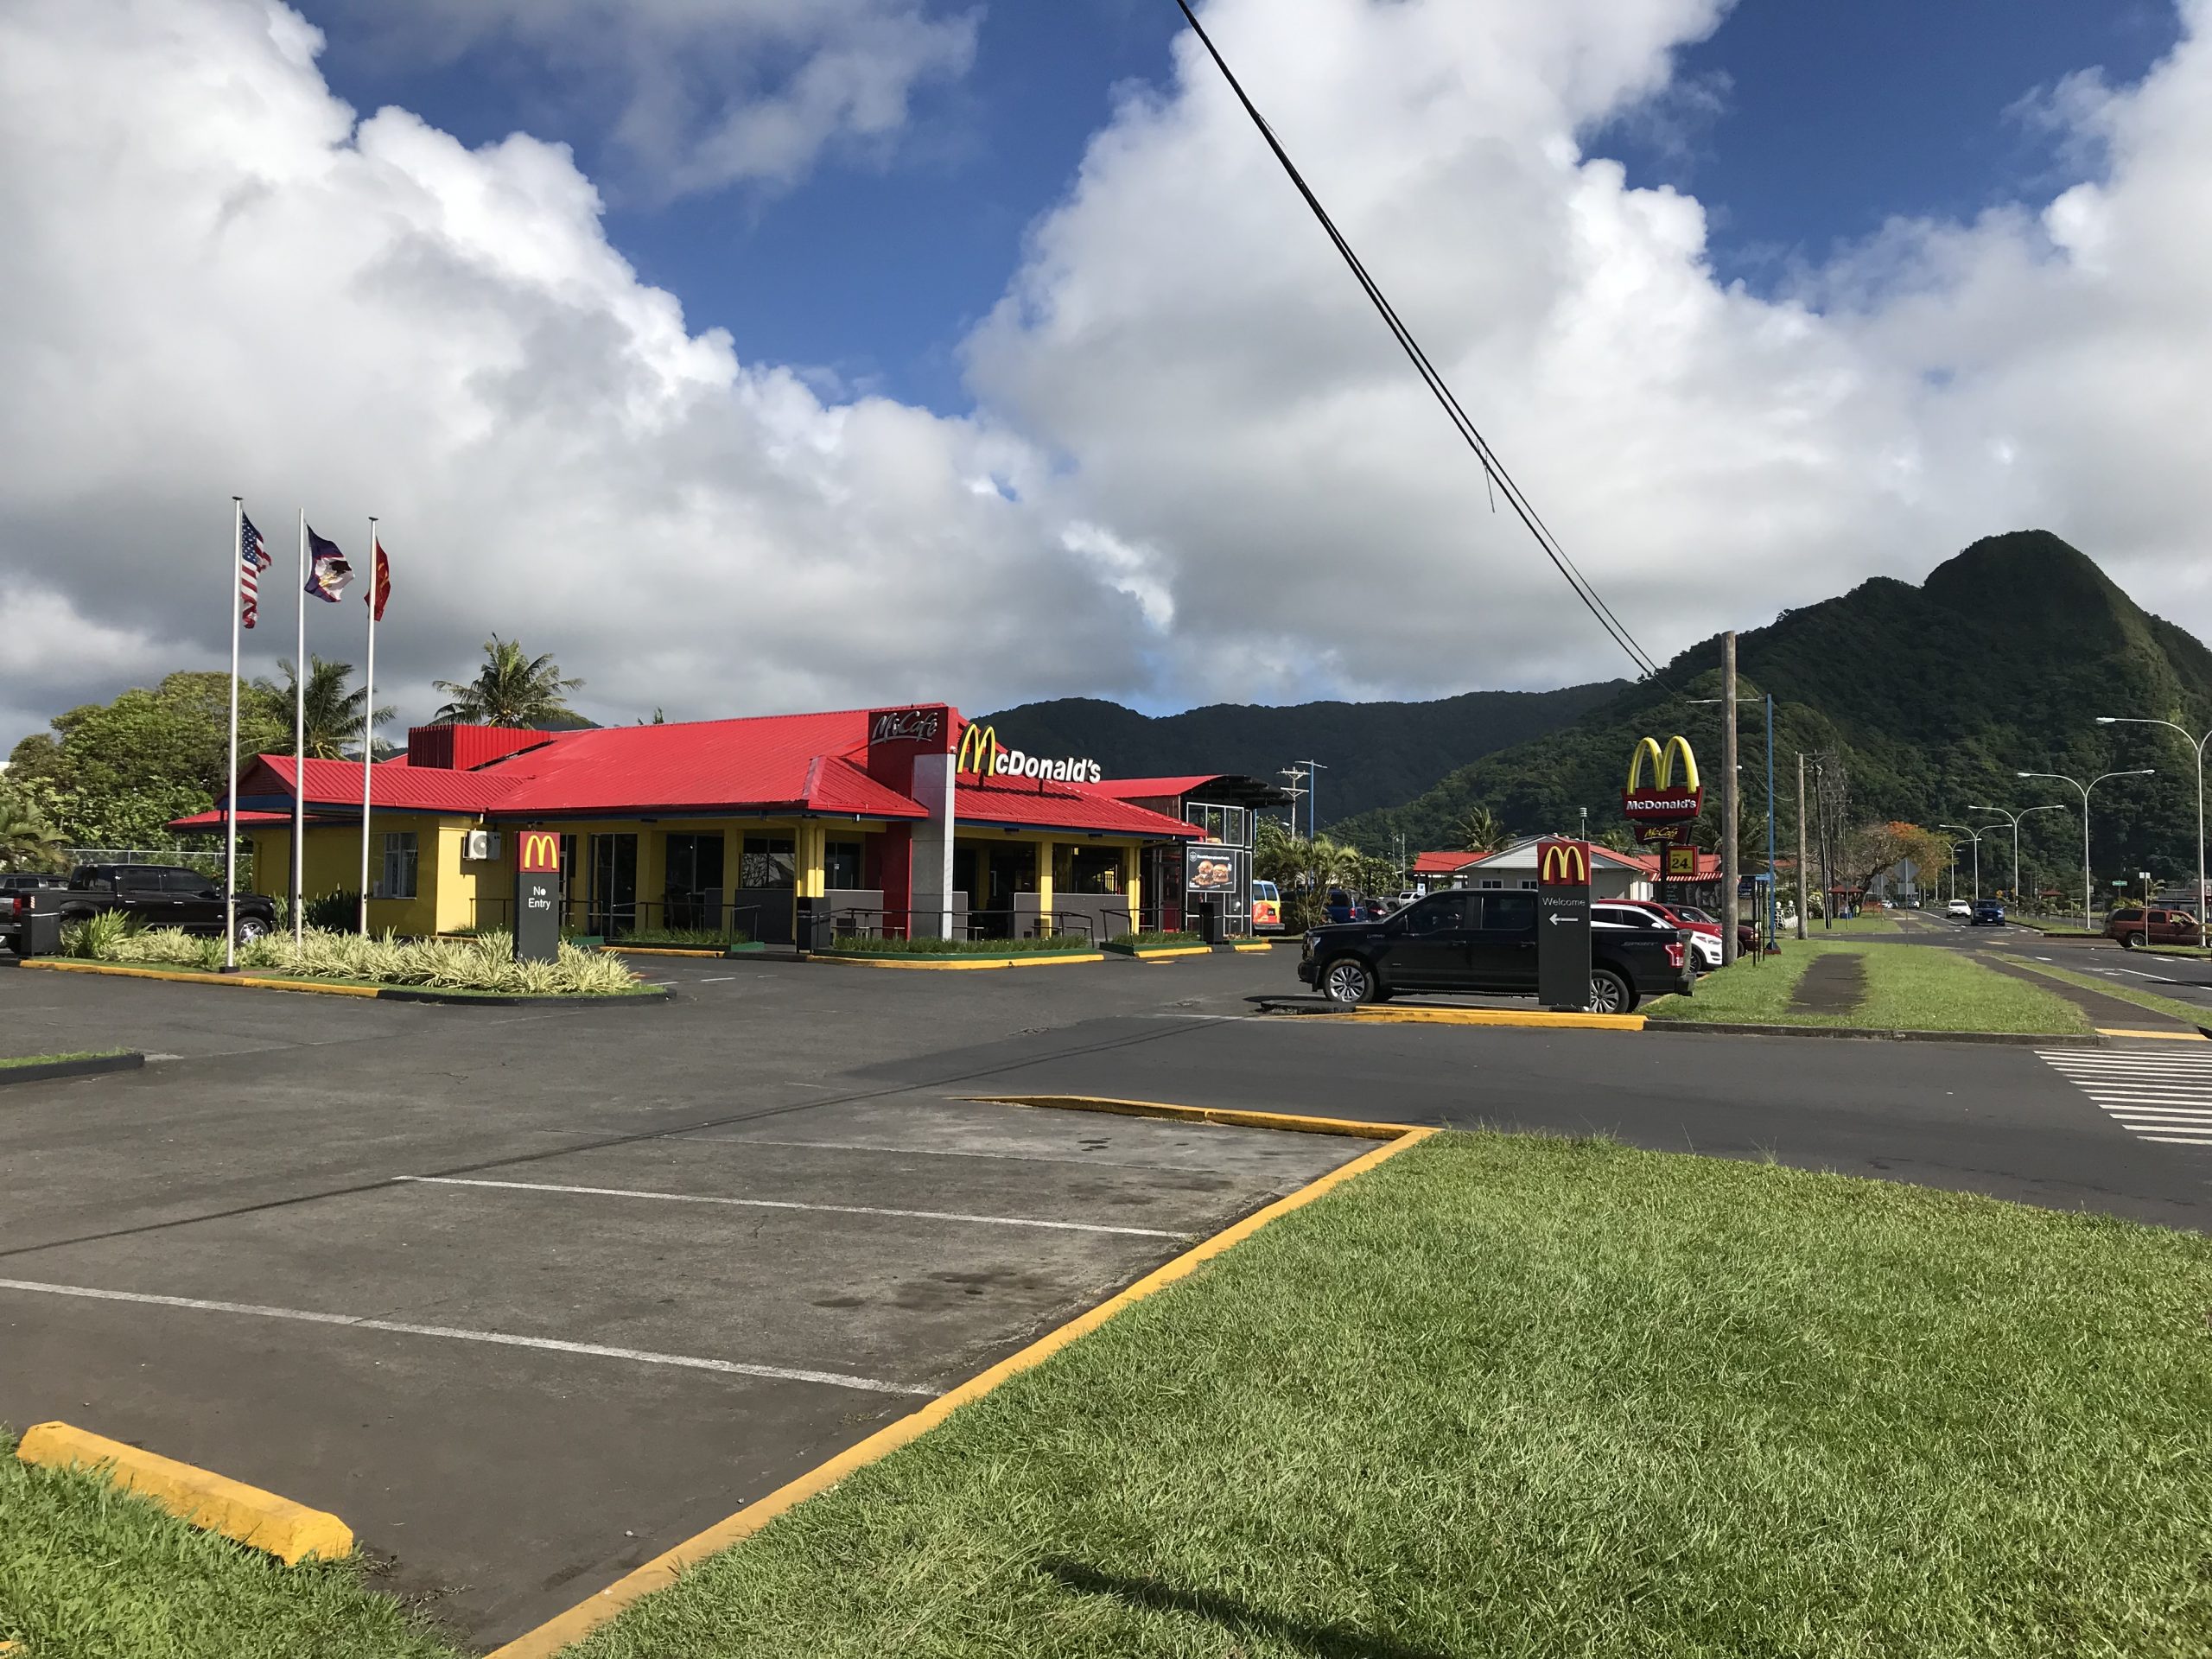 a McDonald's restaurant with parking lot in the foreground